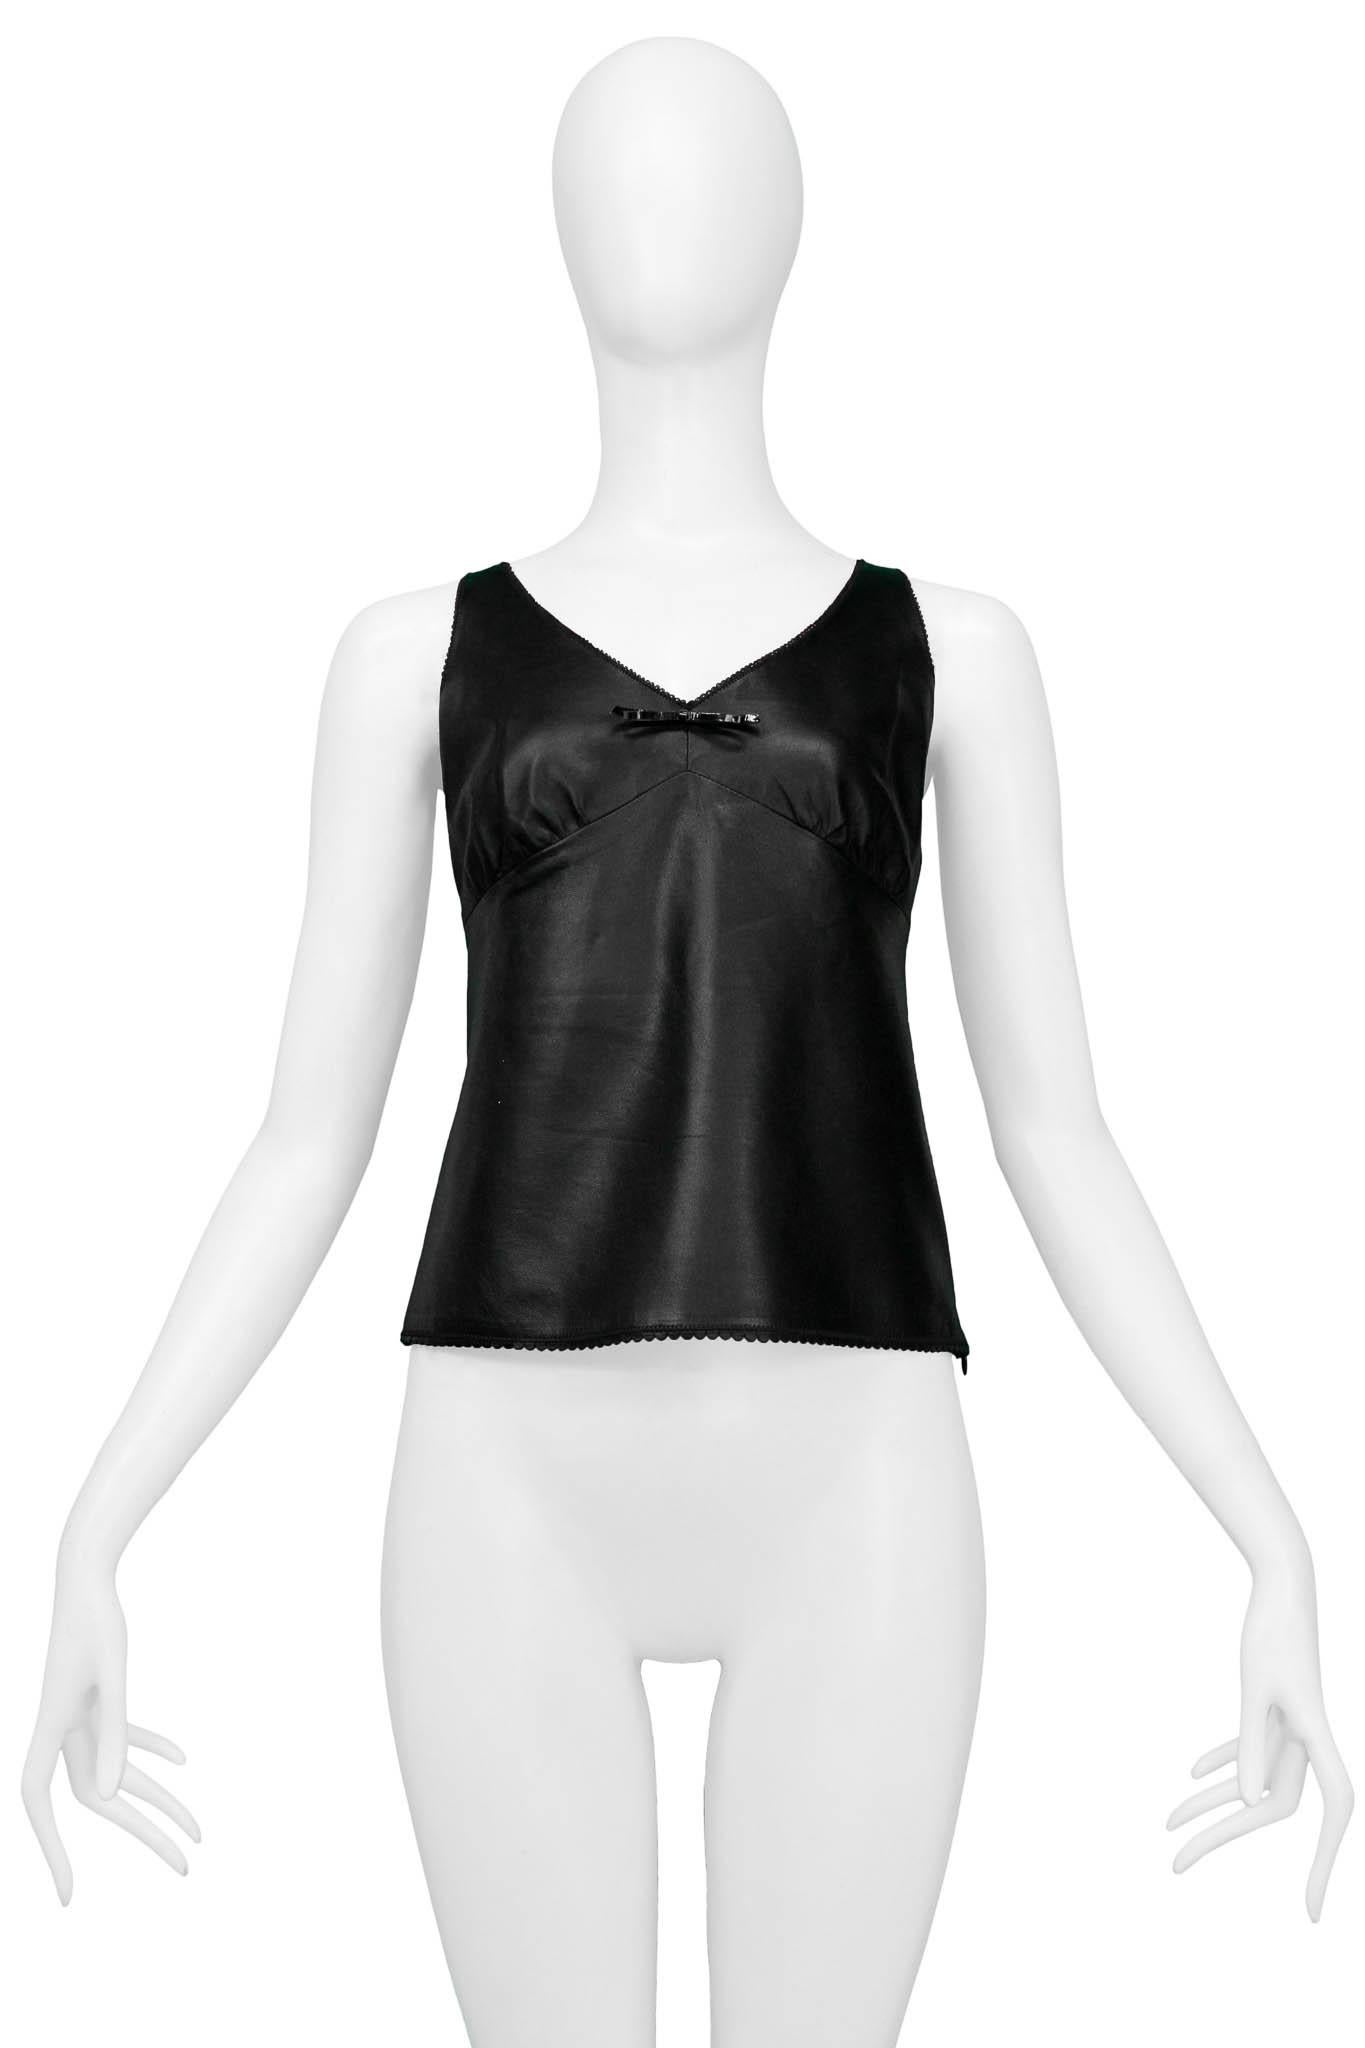 Resurrection Vintage is excited to offer a vintage Prada black leather tank top featuring slight gathering on the bust cups, a small patent-leather bow on the front, and an invisible zipper along the side seam.

Prada, Italy
Size 38
100%